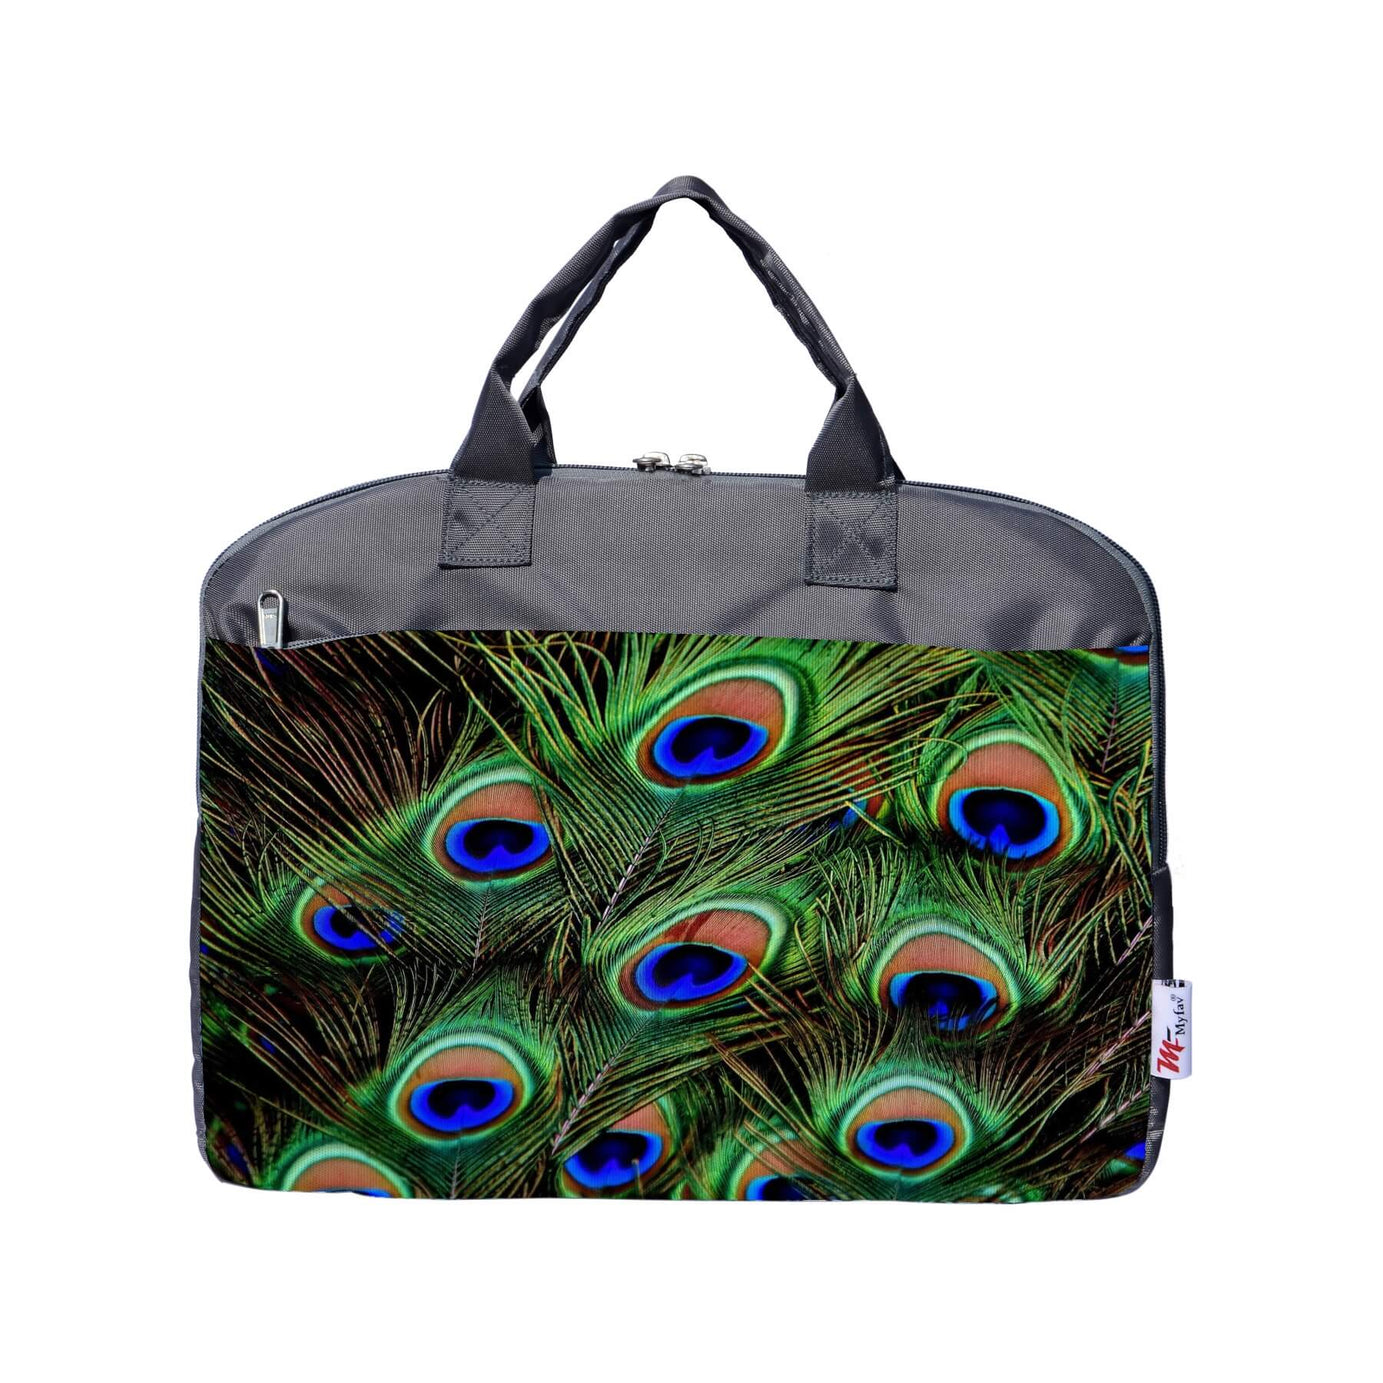 My Fav Peacock Feather Office Laptop Bag Briefcase 15.6 Inch for Women and Men